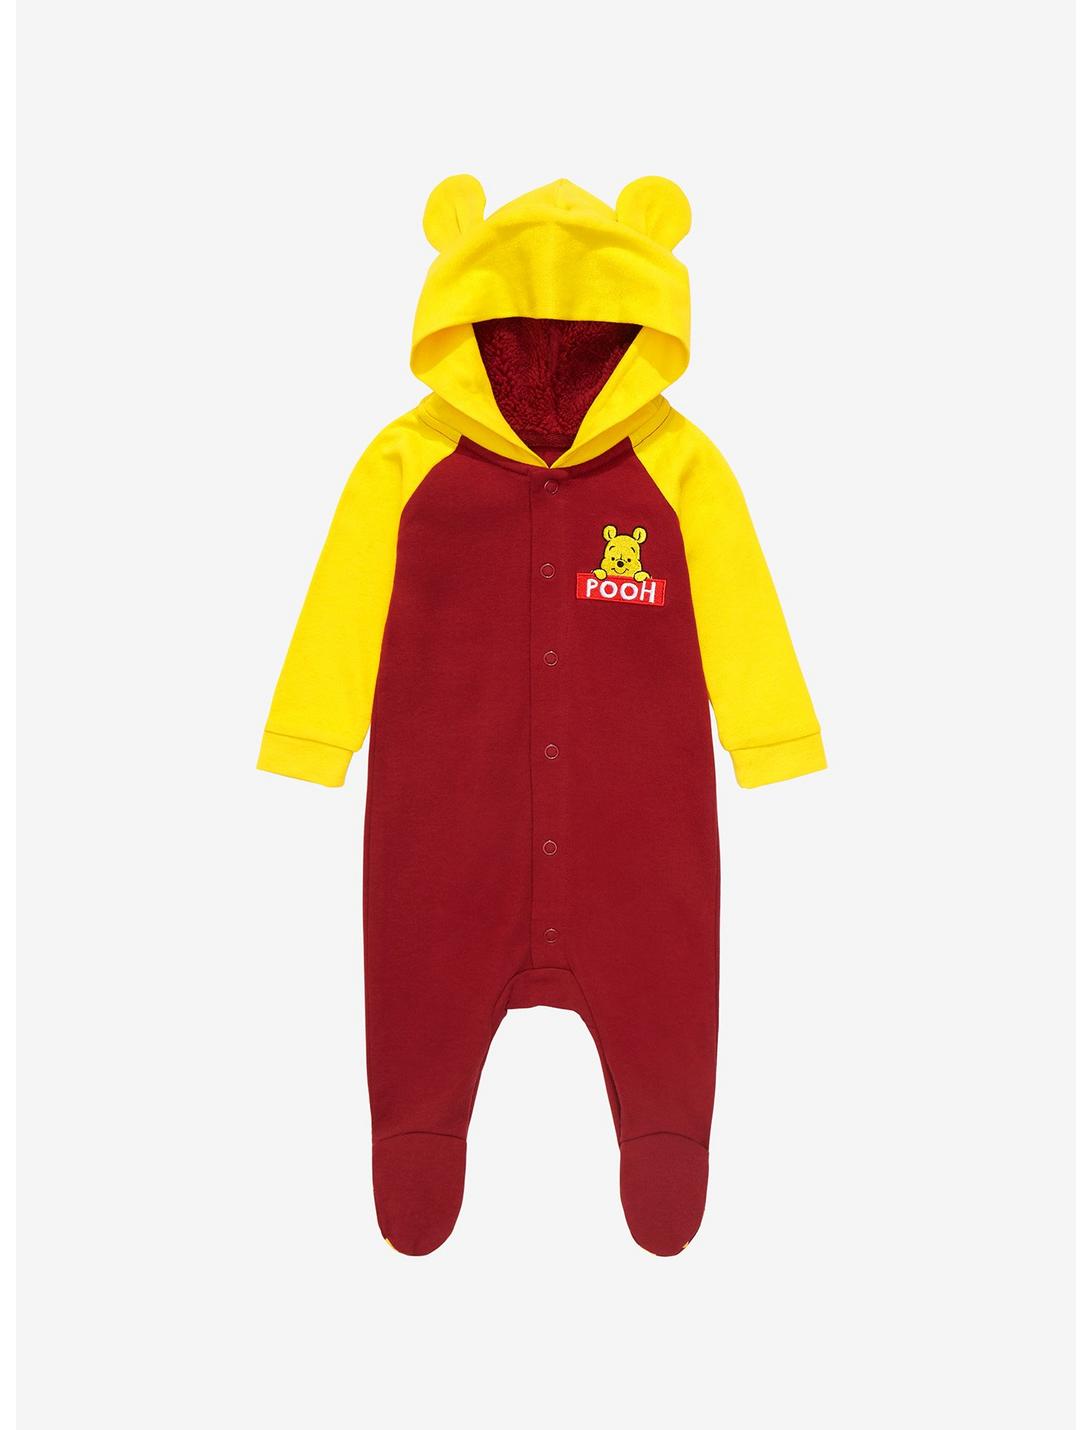 Disney Winnie the Pooh Eared Hood Full-Body Infant One-Piece, RED, hi-res